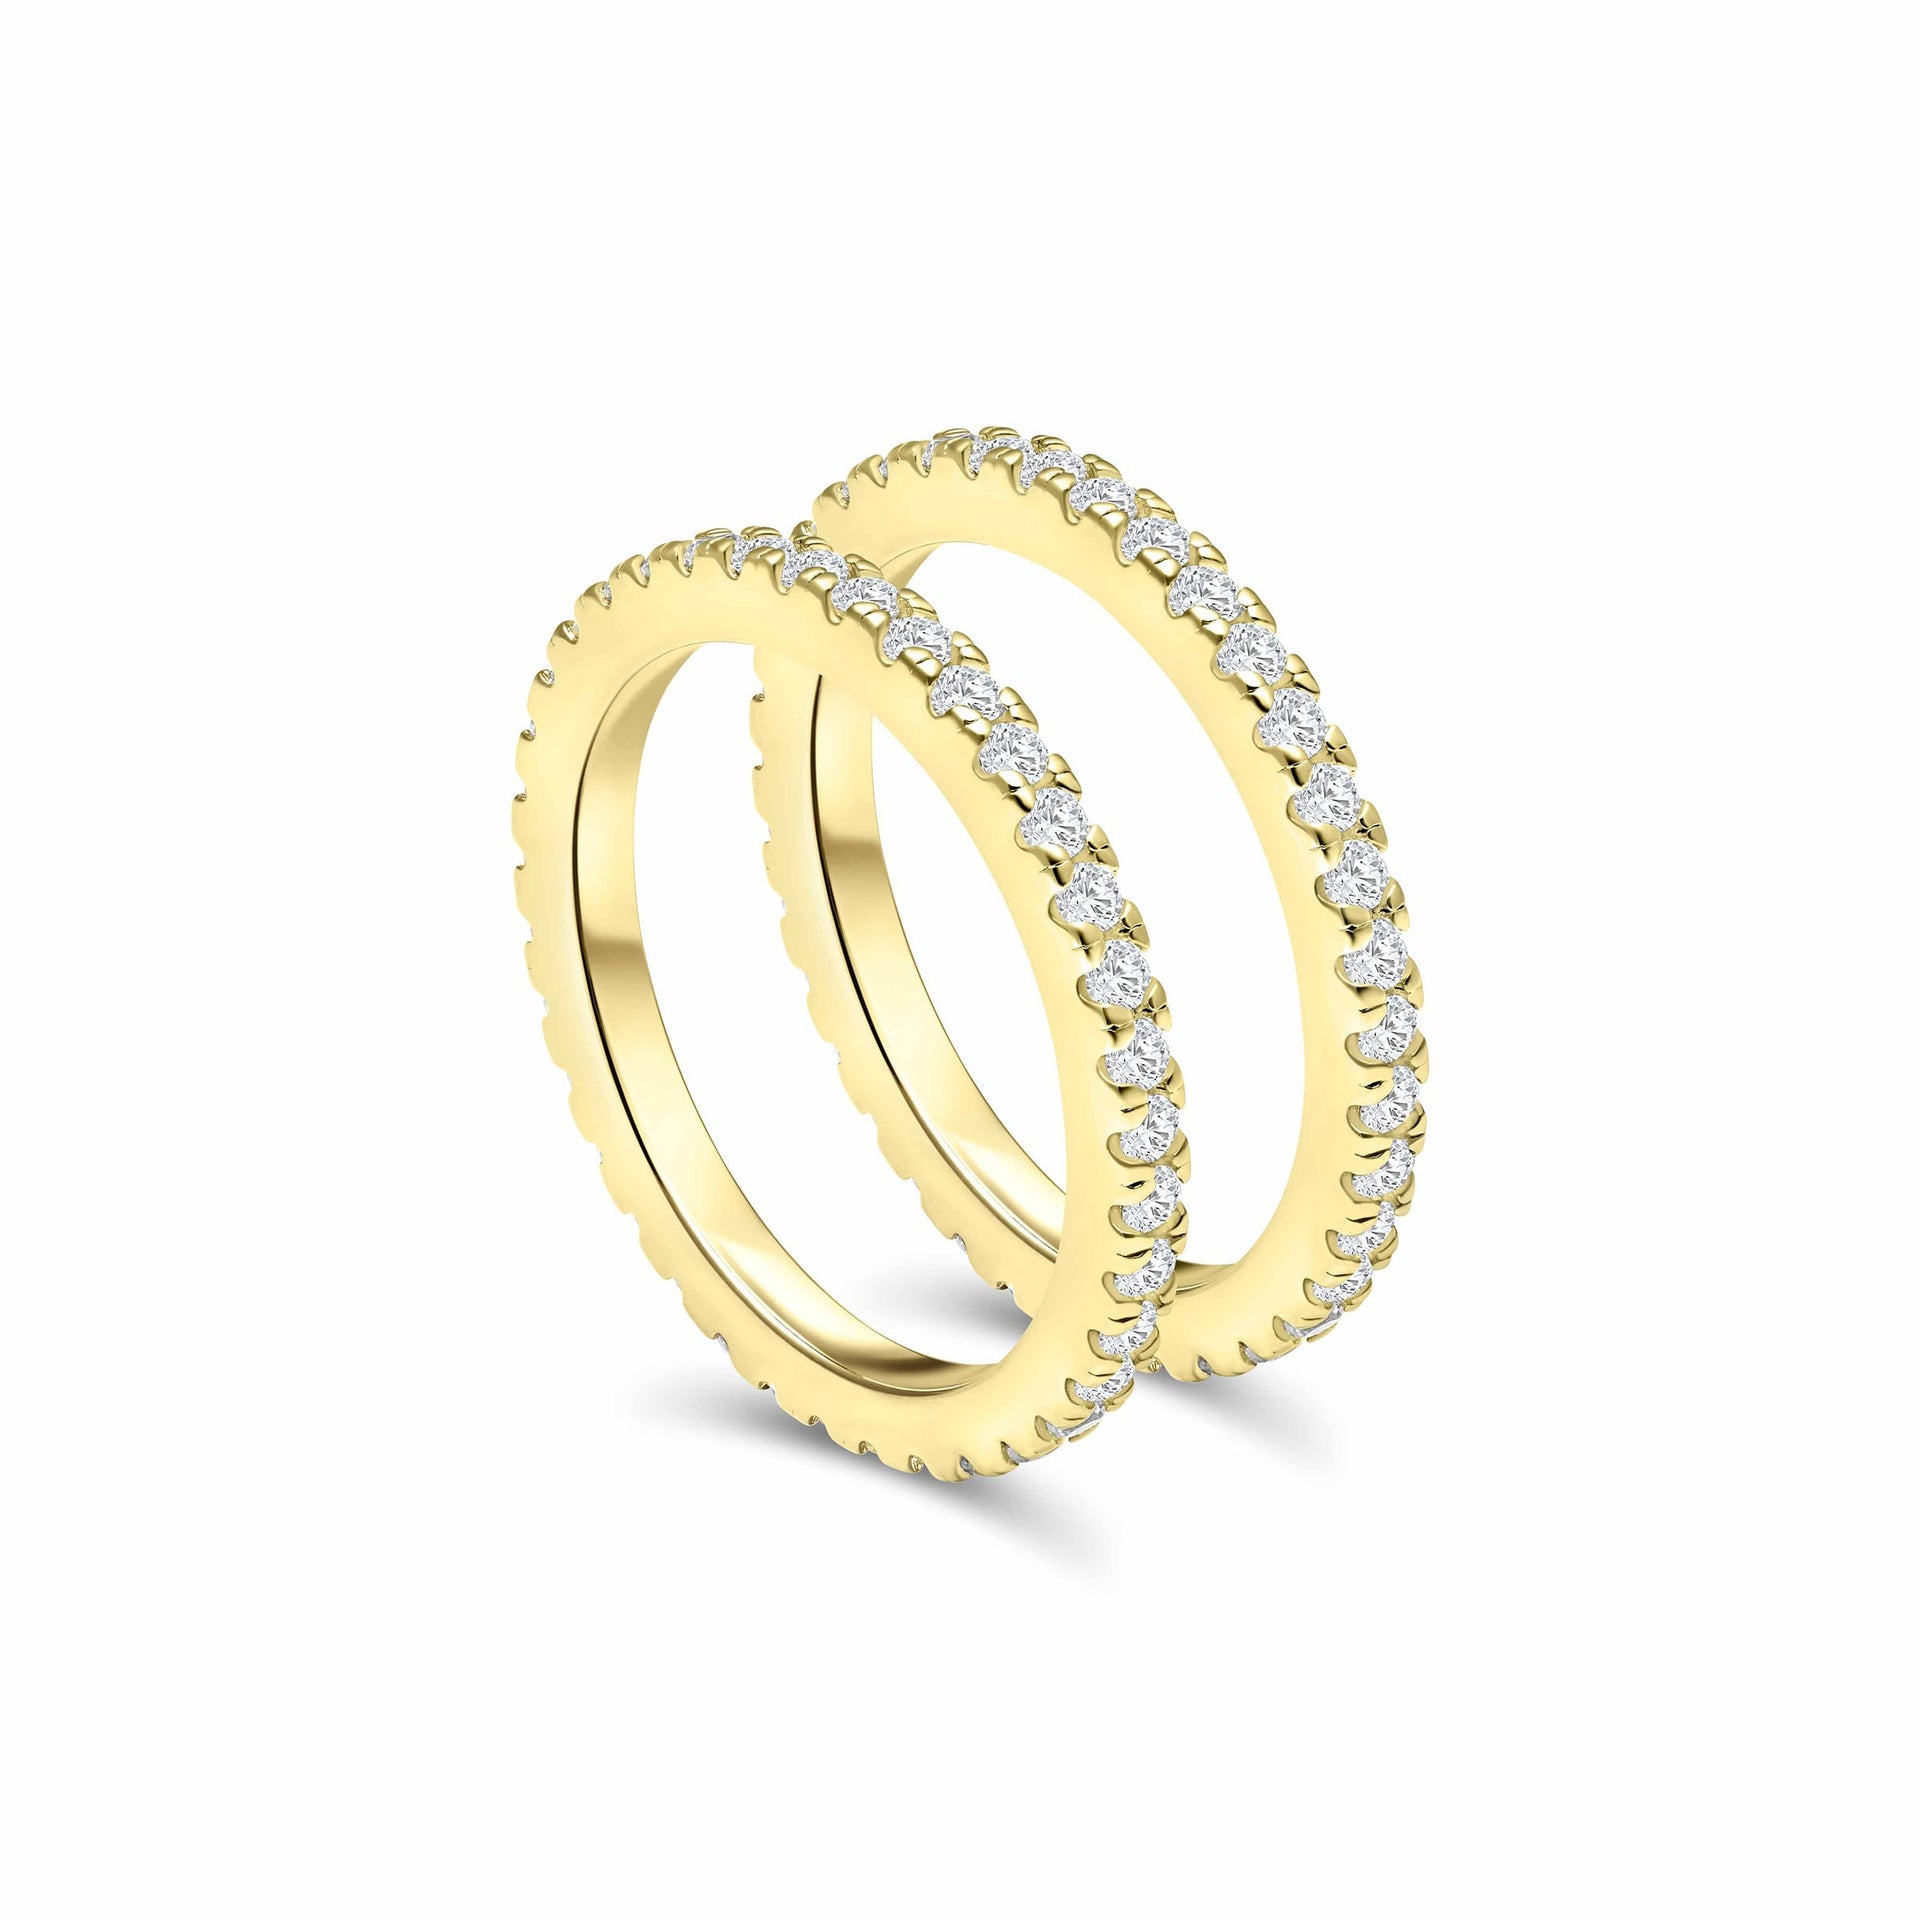 gorgeous gold promise wedding bands standing